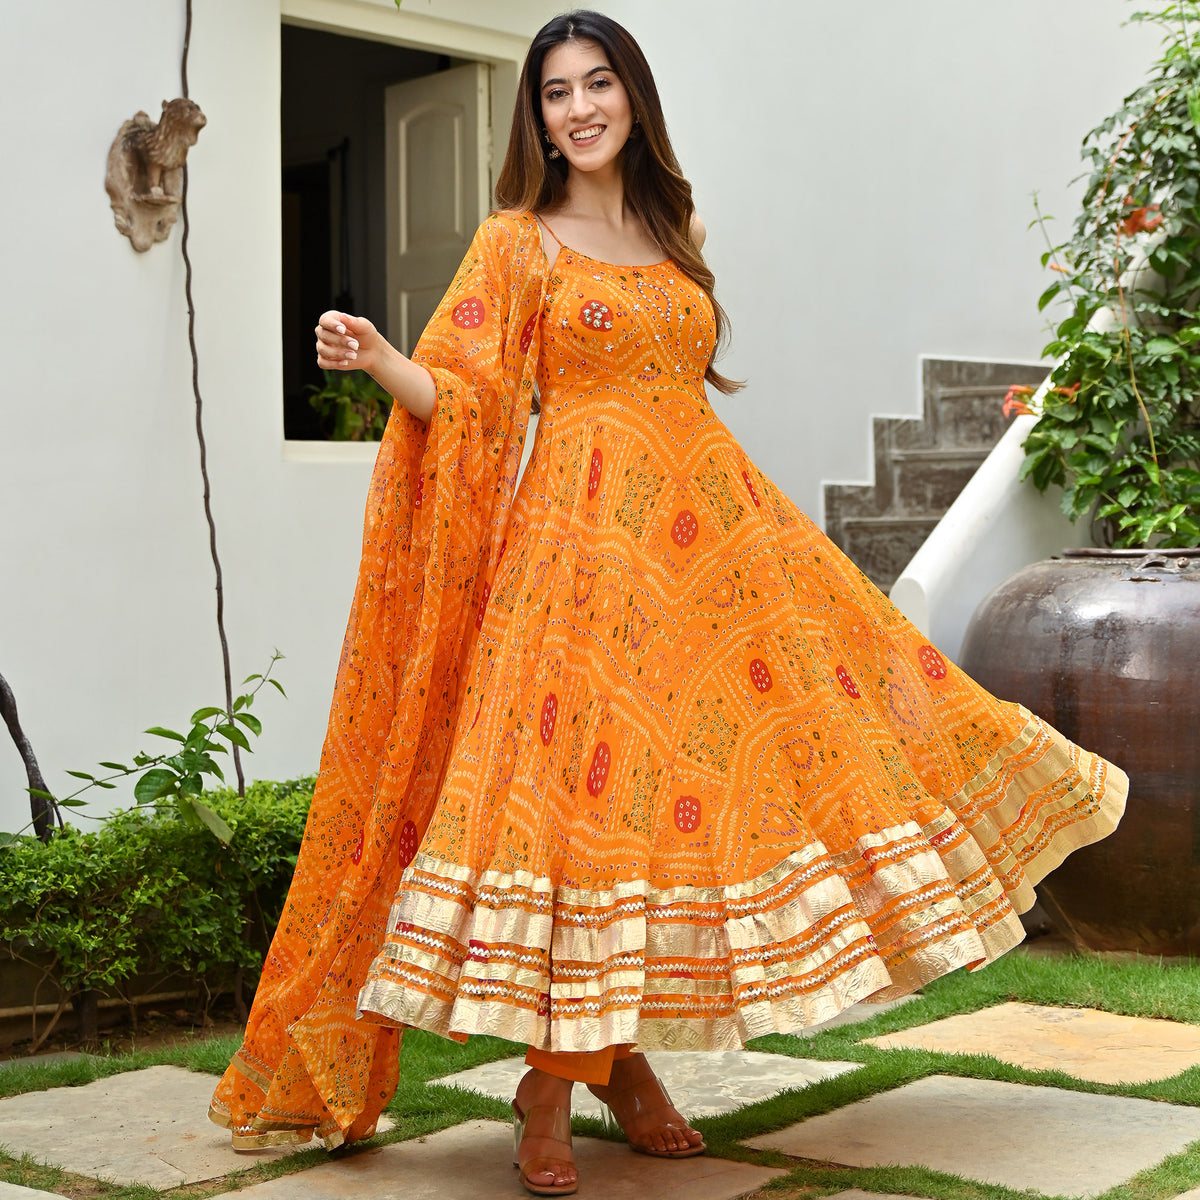 Is a bright mustard yellow dress OK for special occasion? - Quora